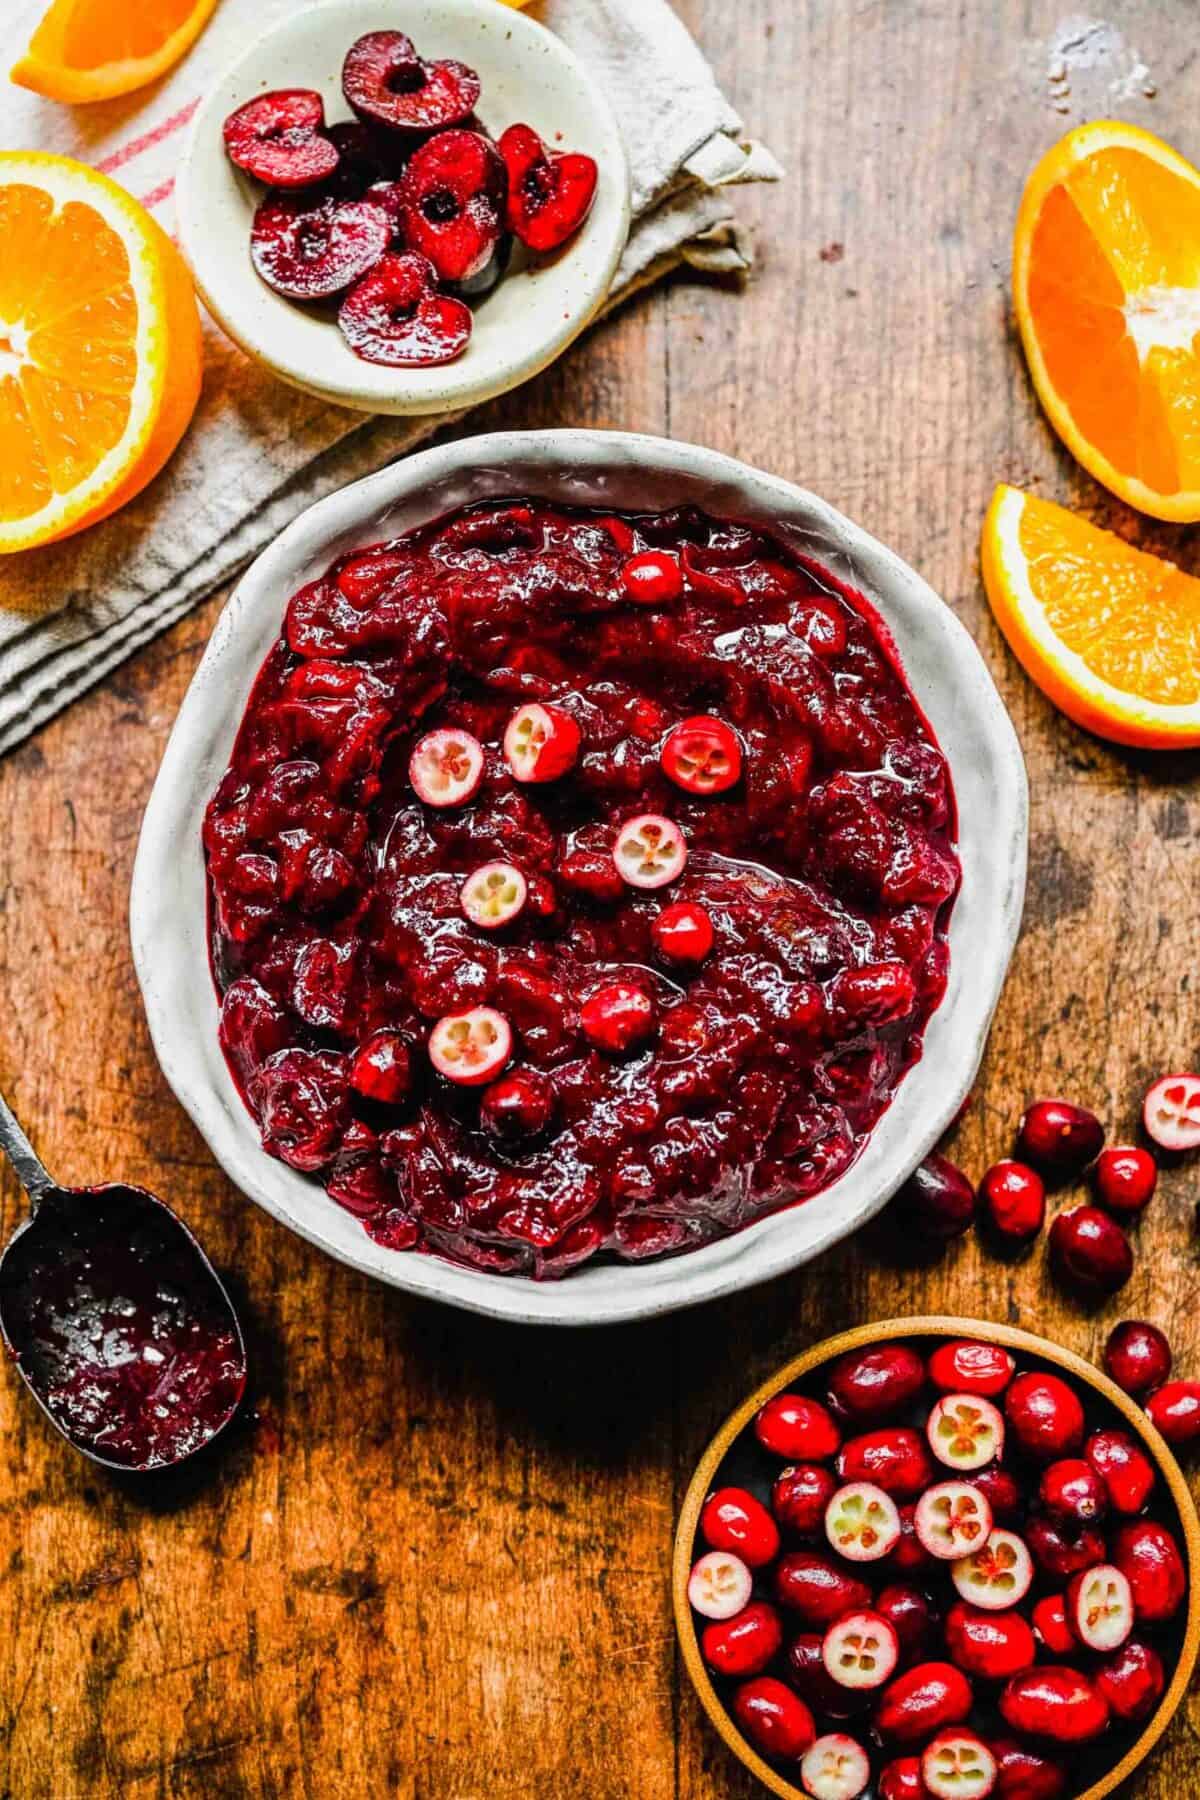 A bowl of cranberry cherry compote topped with fresh cranberries, next to a bowl of cranberries, a bowl of cherries, a dirty spoon, and some orange slices